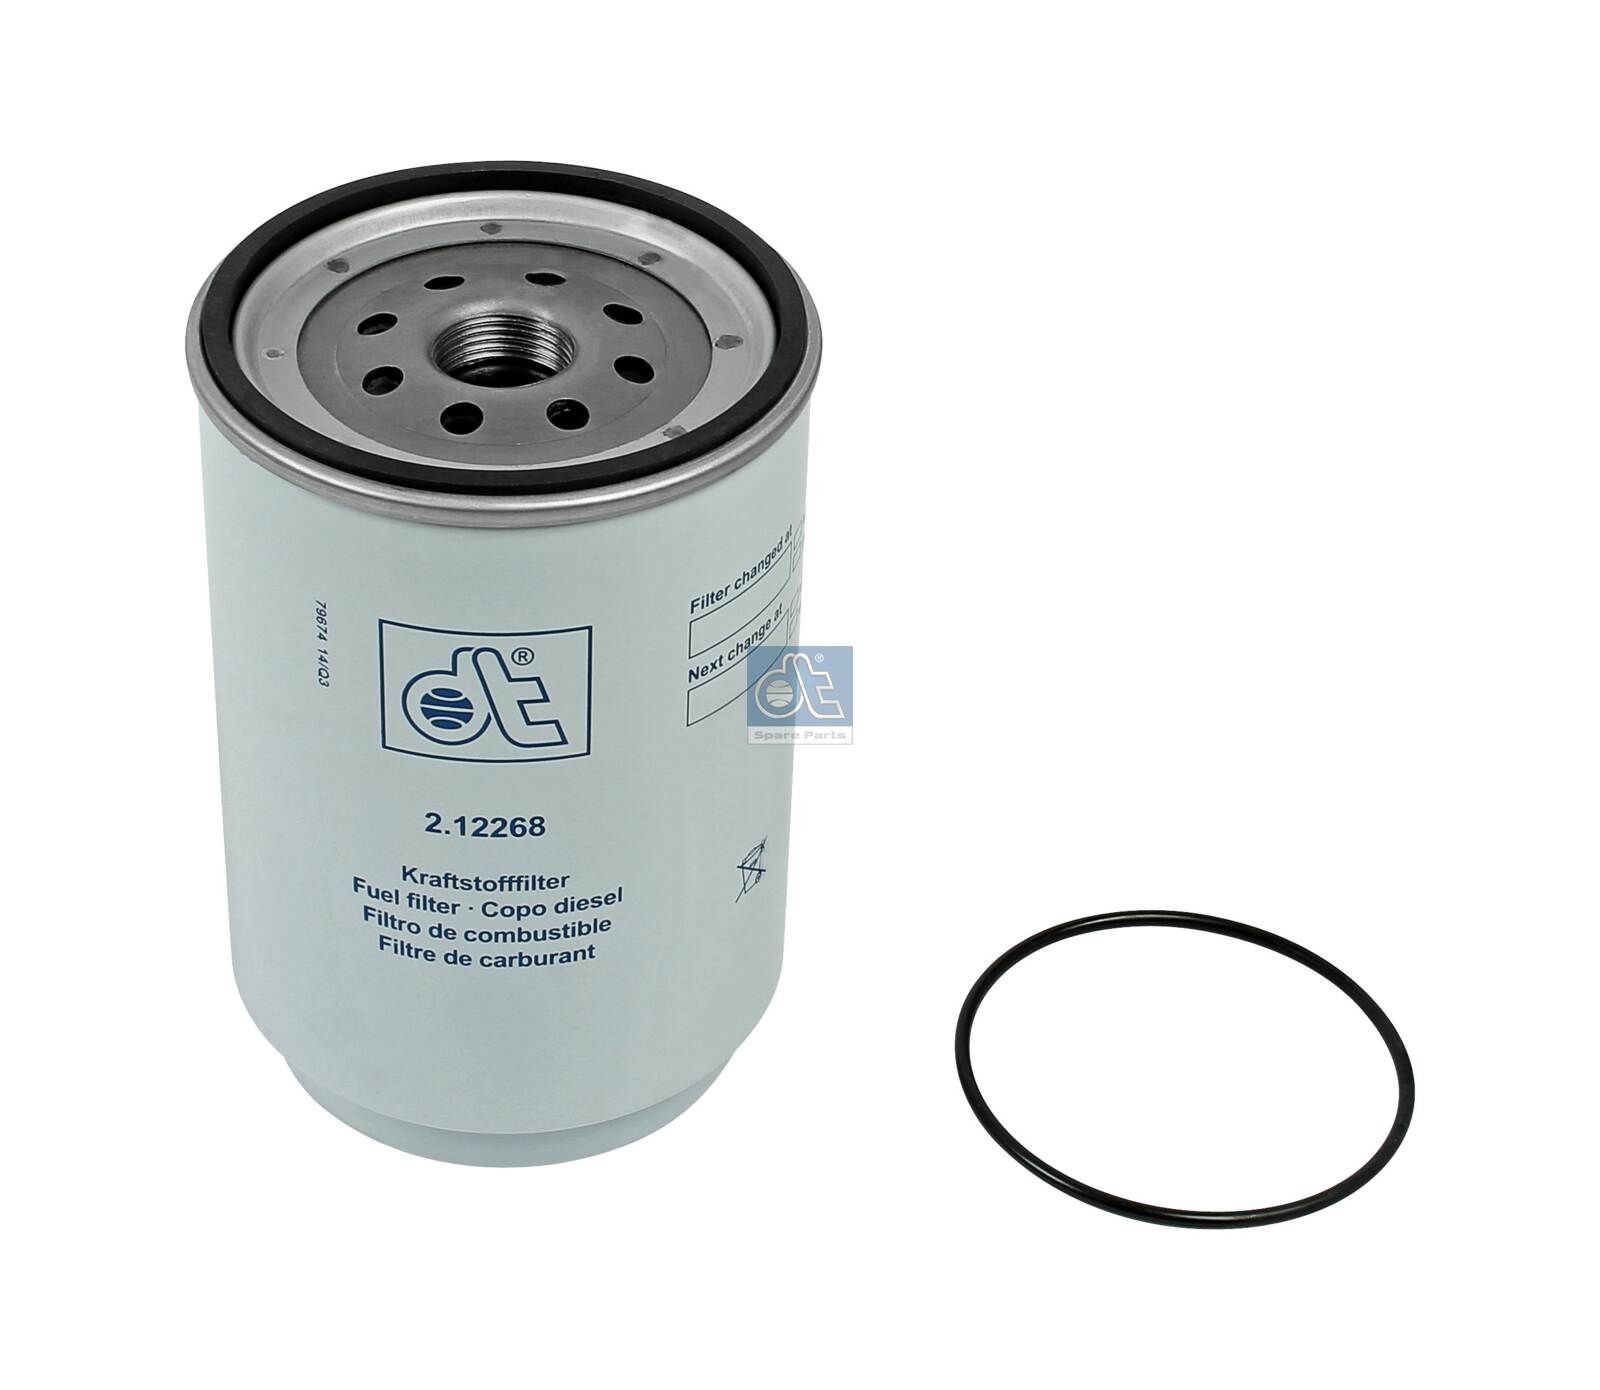 WK 11 001 x DT Spare Parts 2.12268 Fuel filter 20879812